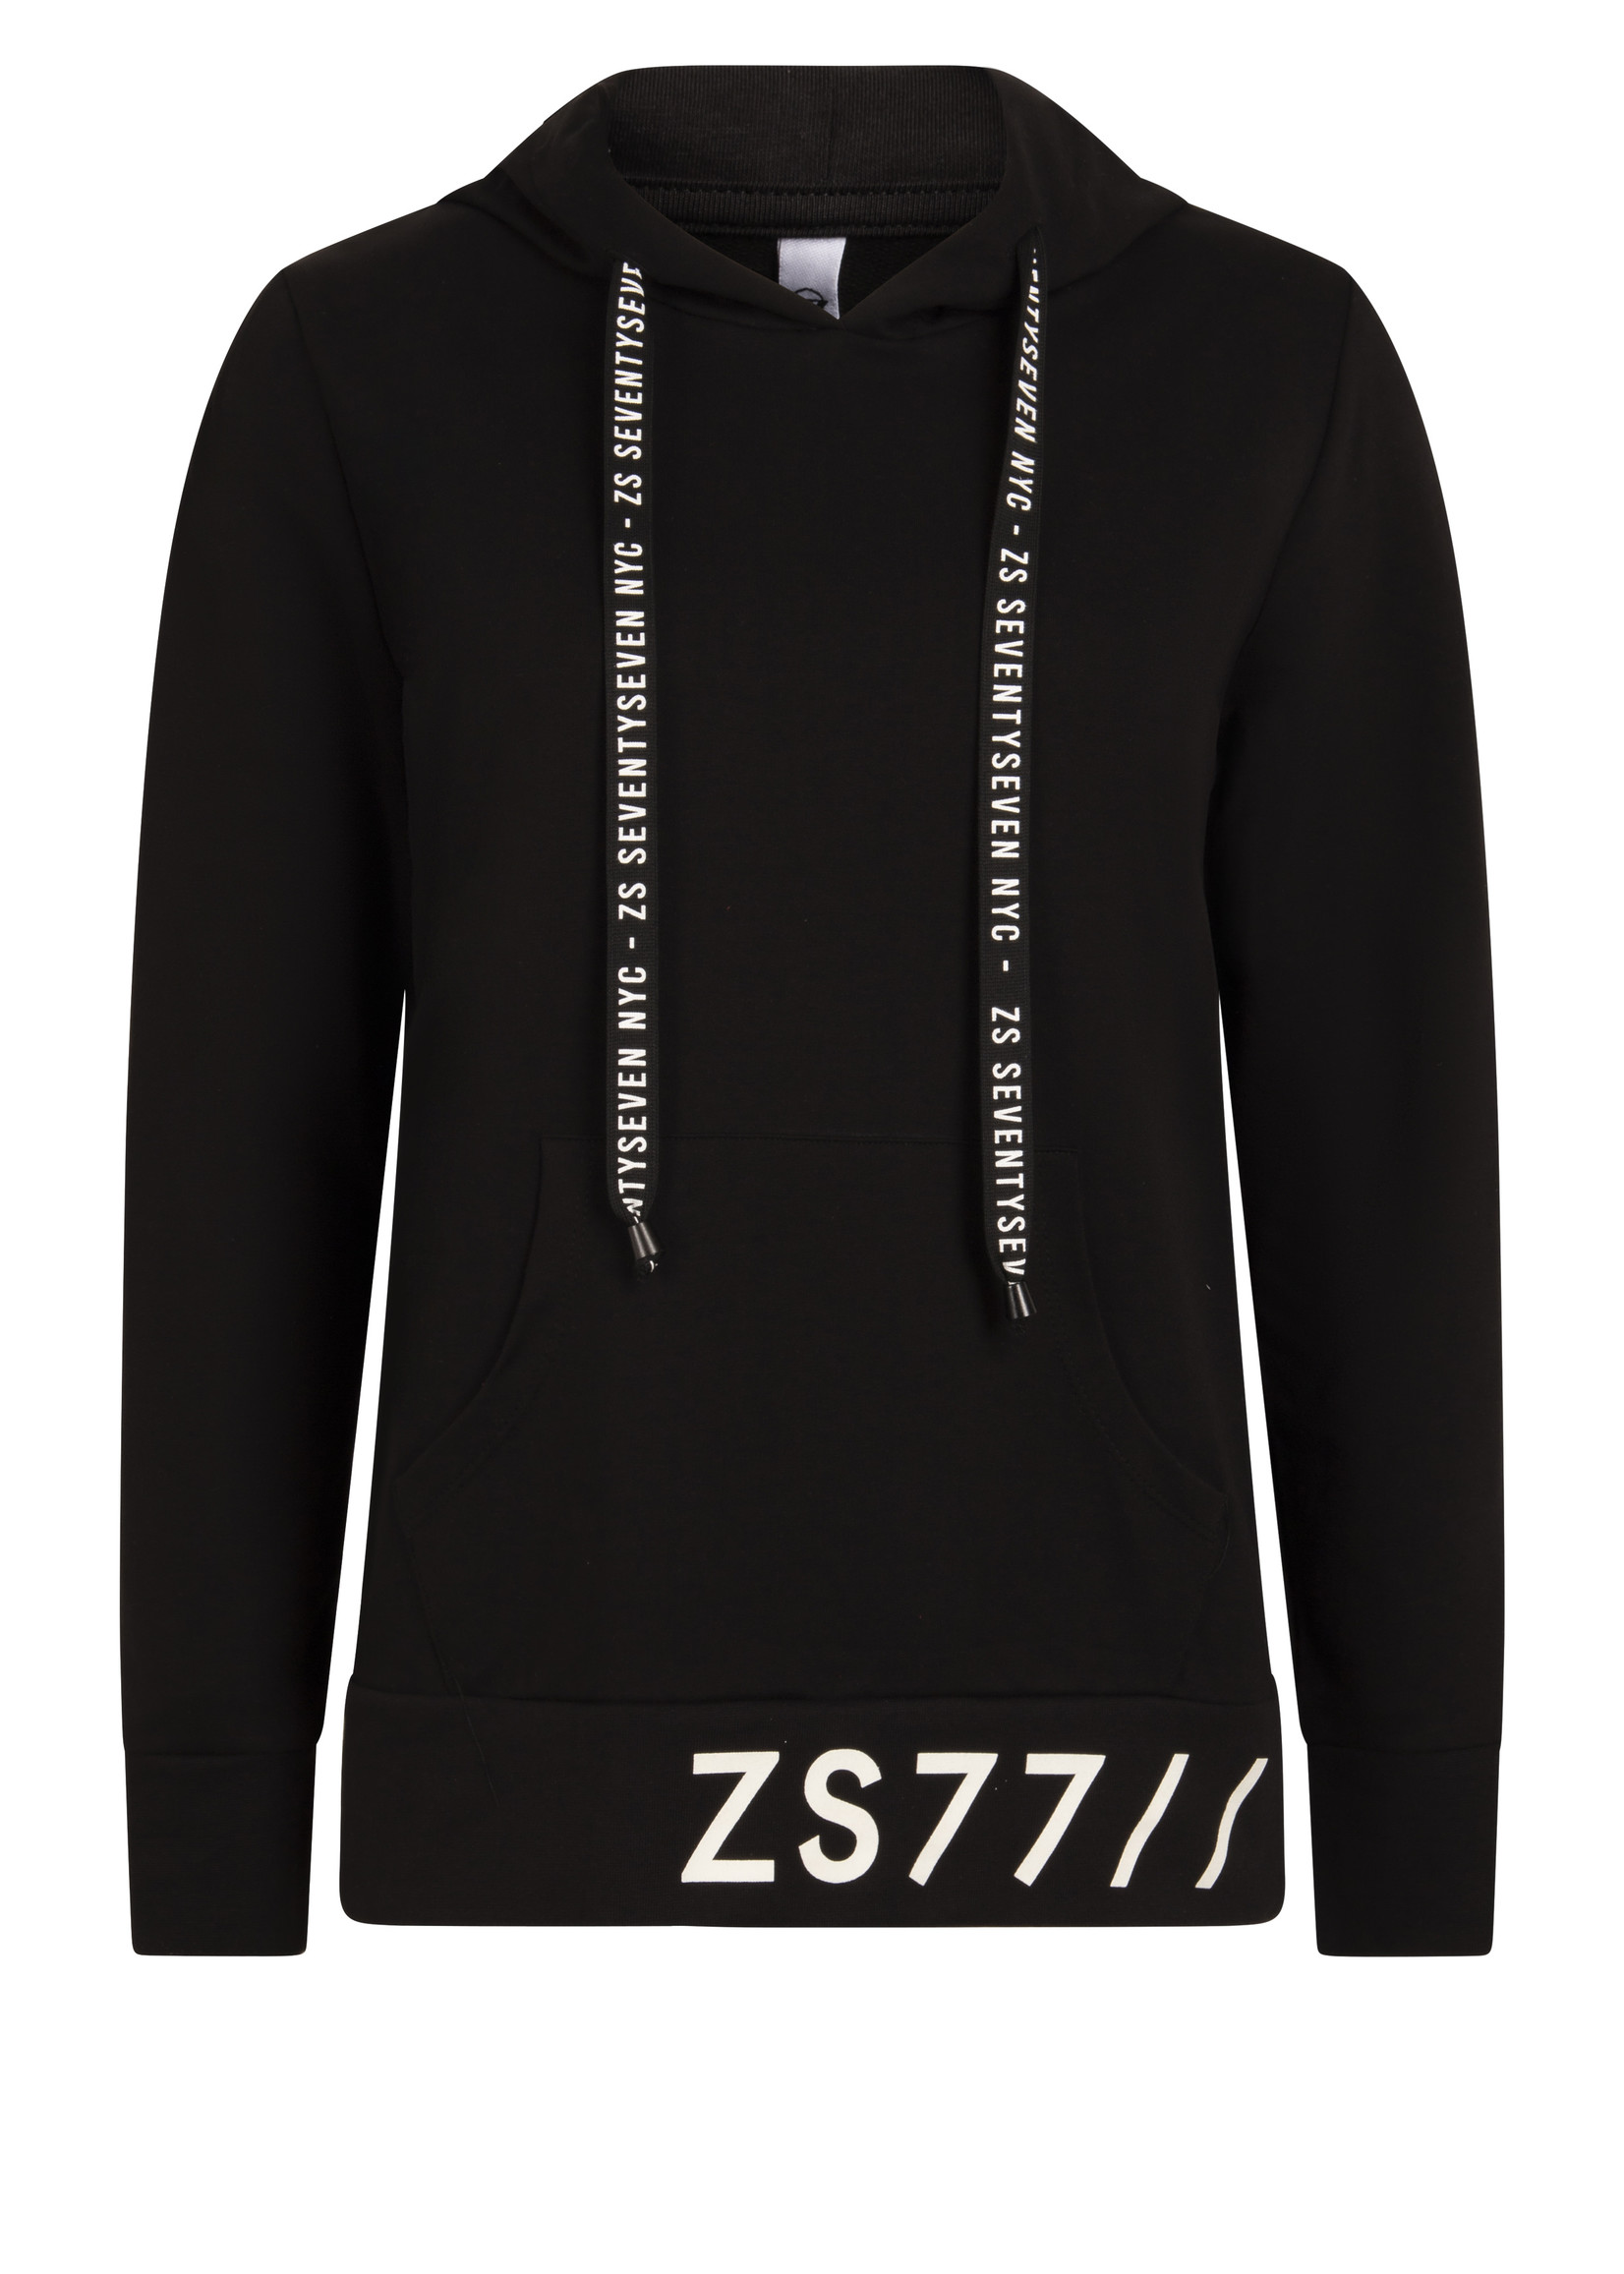 Zoso 221 Bless - Sweater with artwork- Black/off white